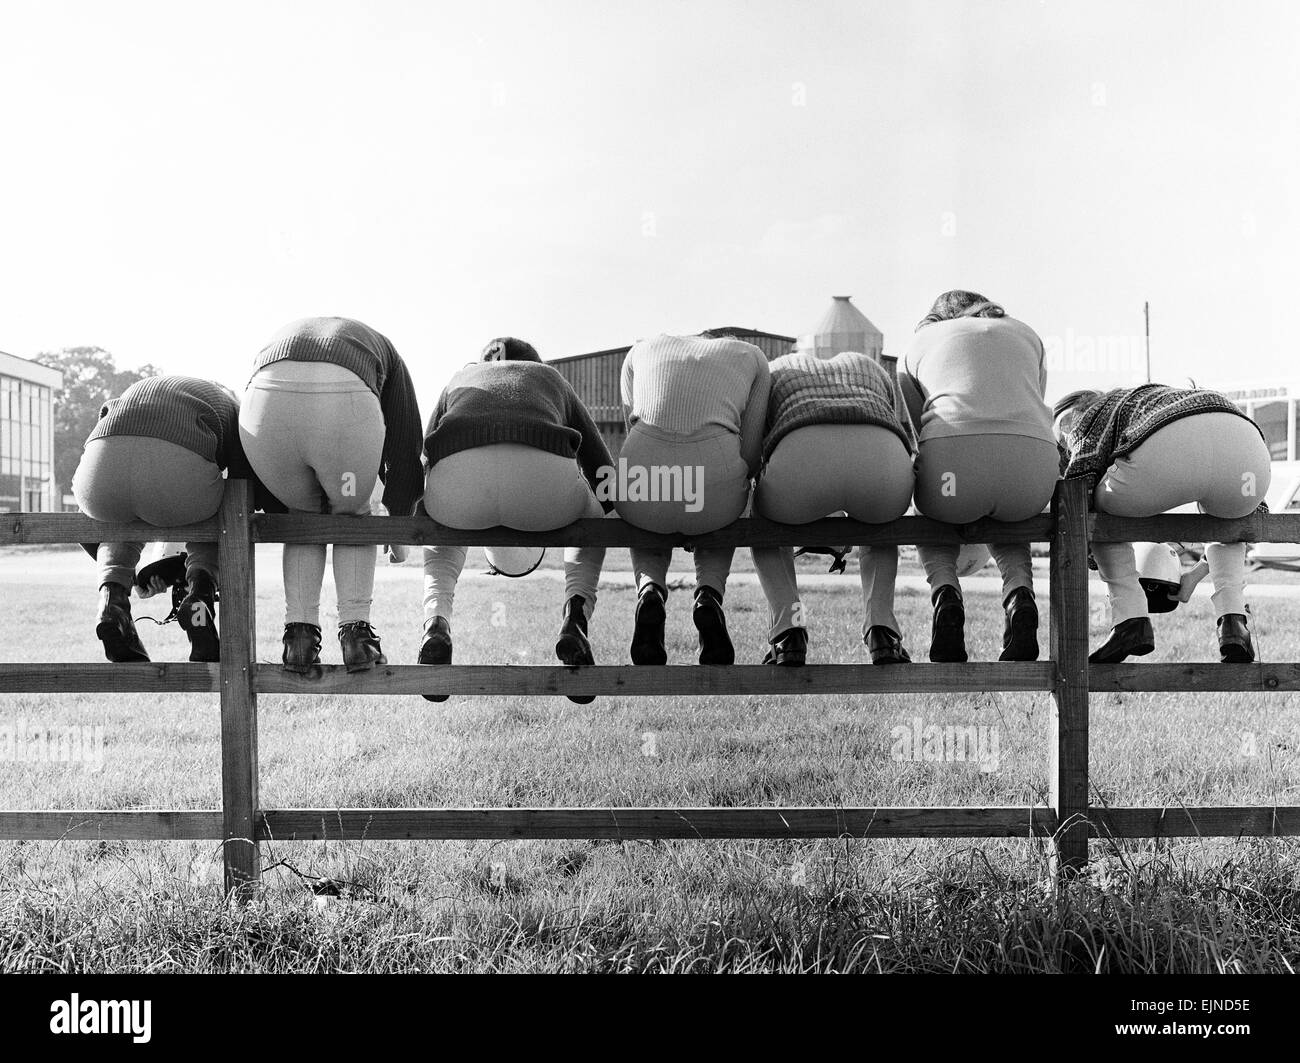 Seven young apprentice female jockeys sitting on a wooden fence during their training at the National Equestrian Centre in Stoneleigh, Warwickshire.The course runs for six weeks and those who make the grade can then apply for professional licences. 14th August 1974. Stock Photo